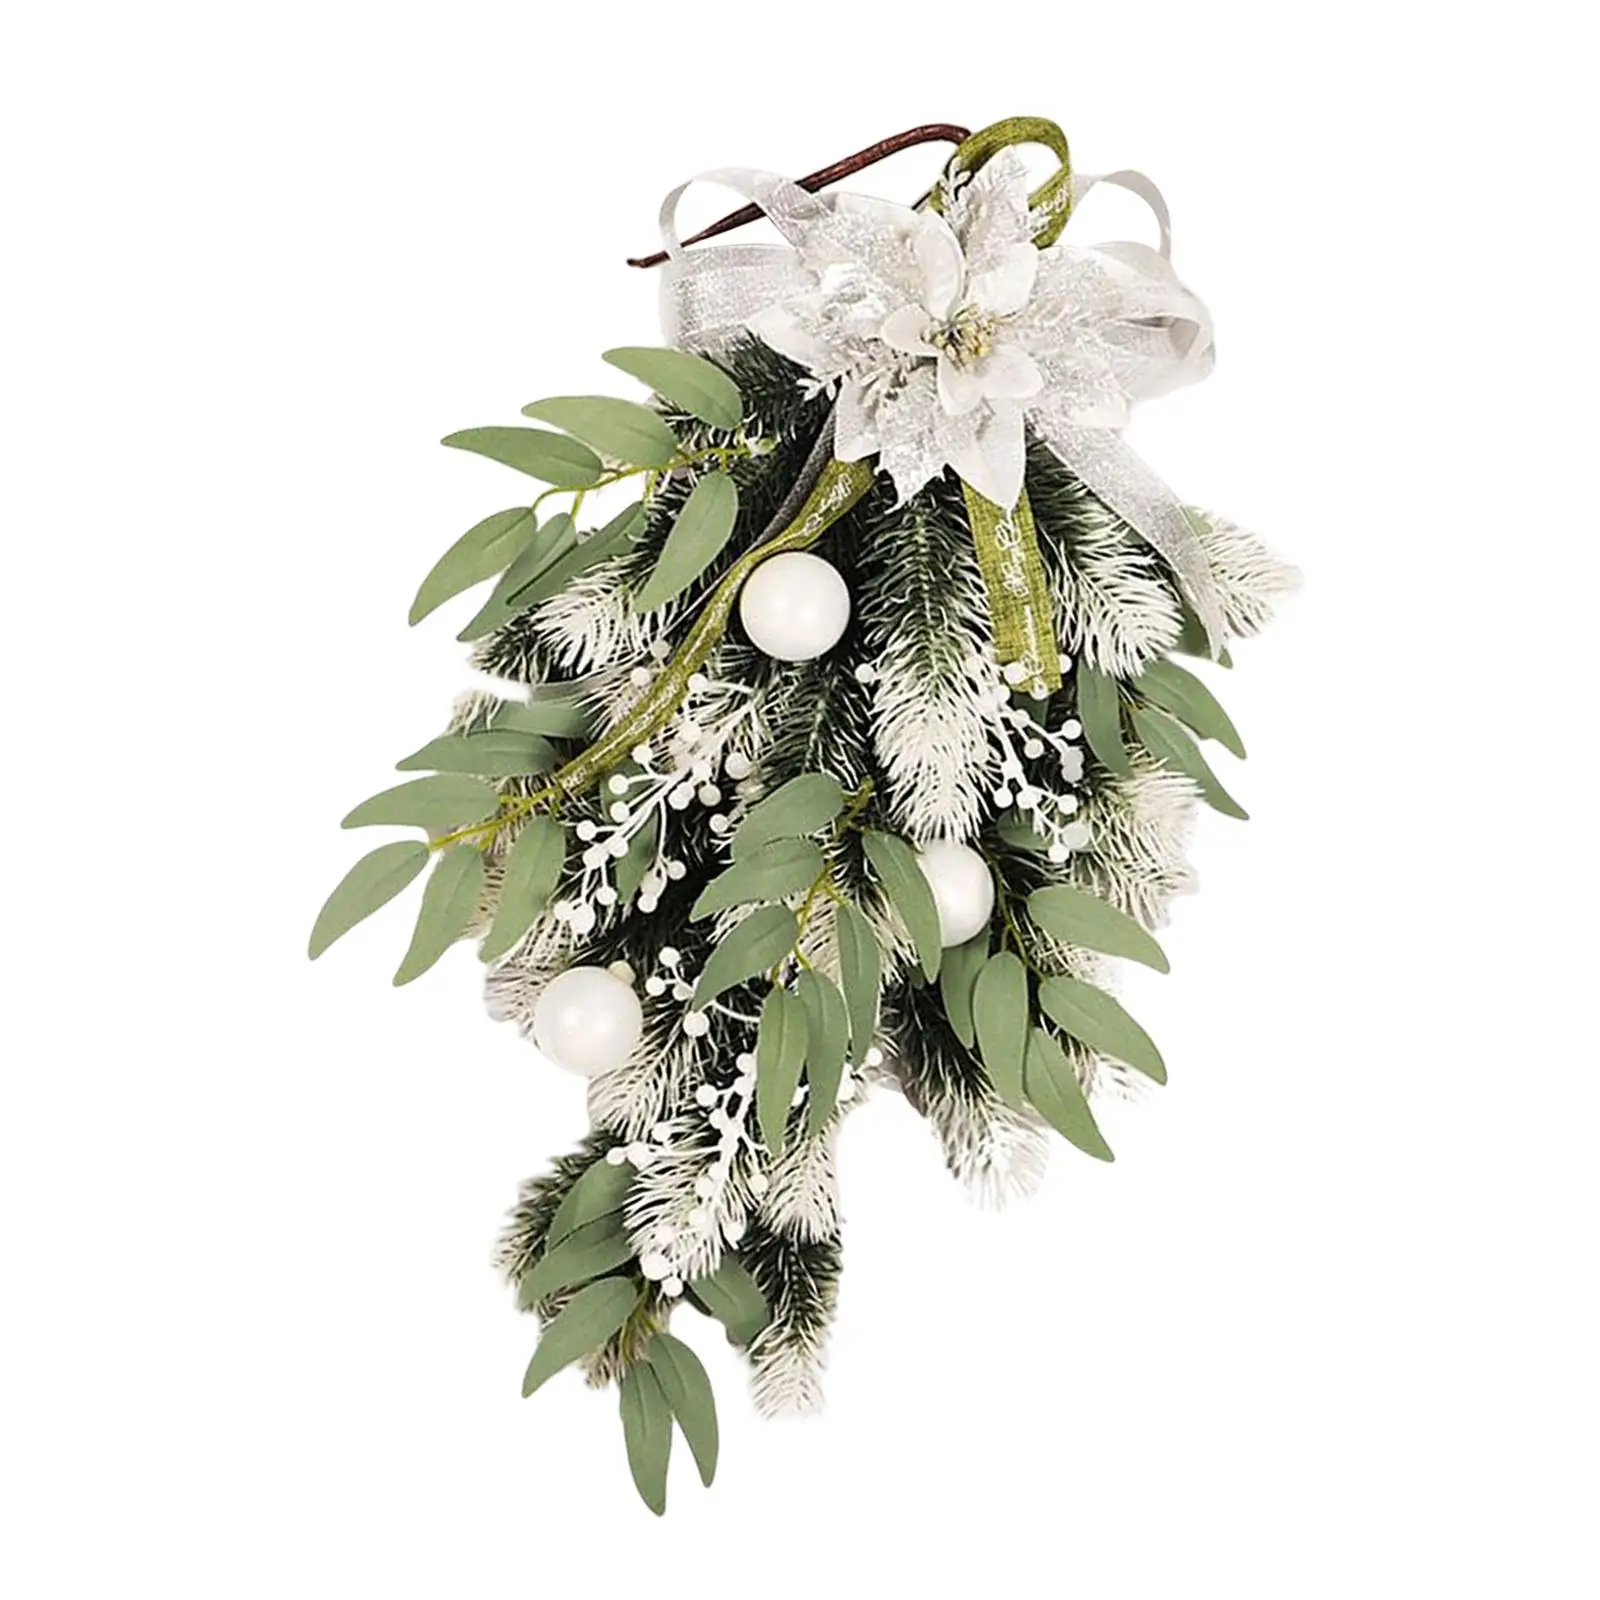 Artificial Christmas Teardrop Swag Wreath Garland Swag for Decorations